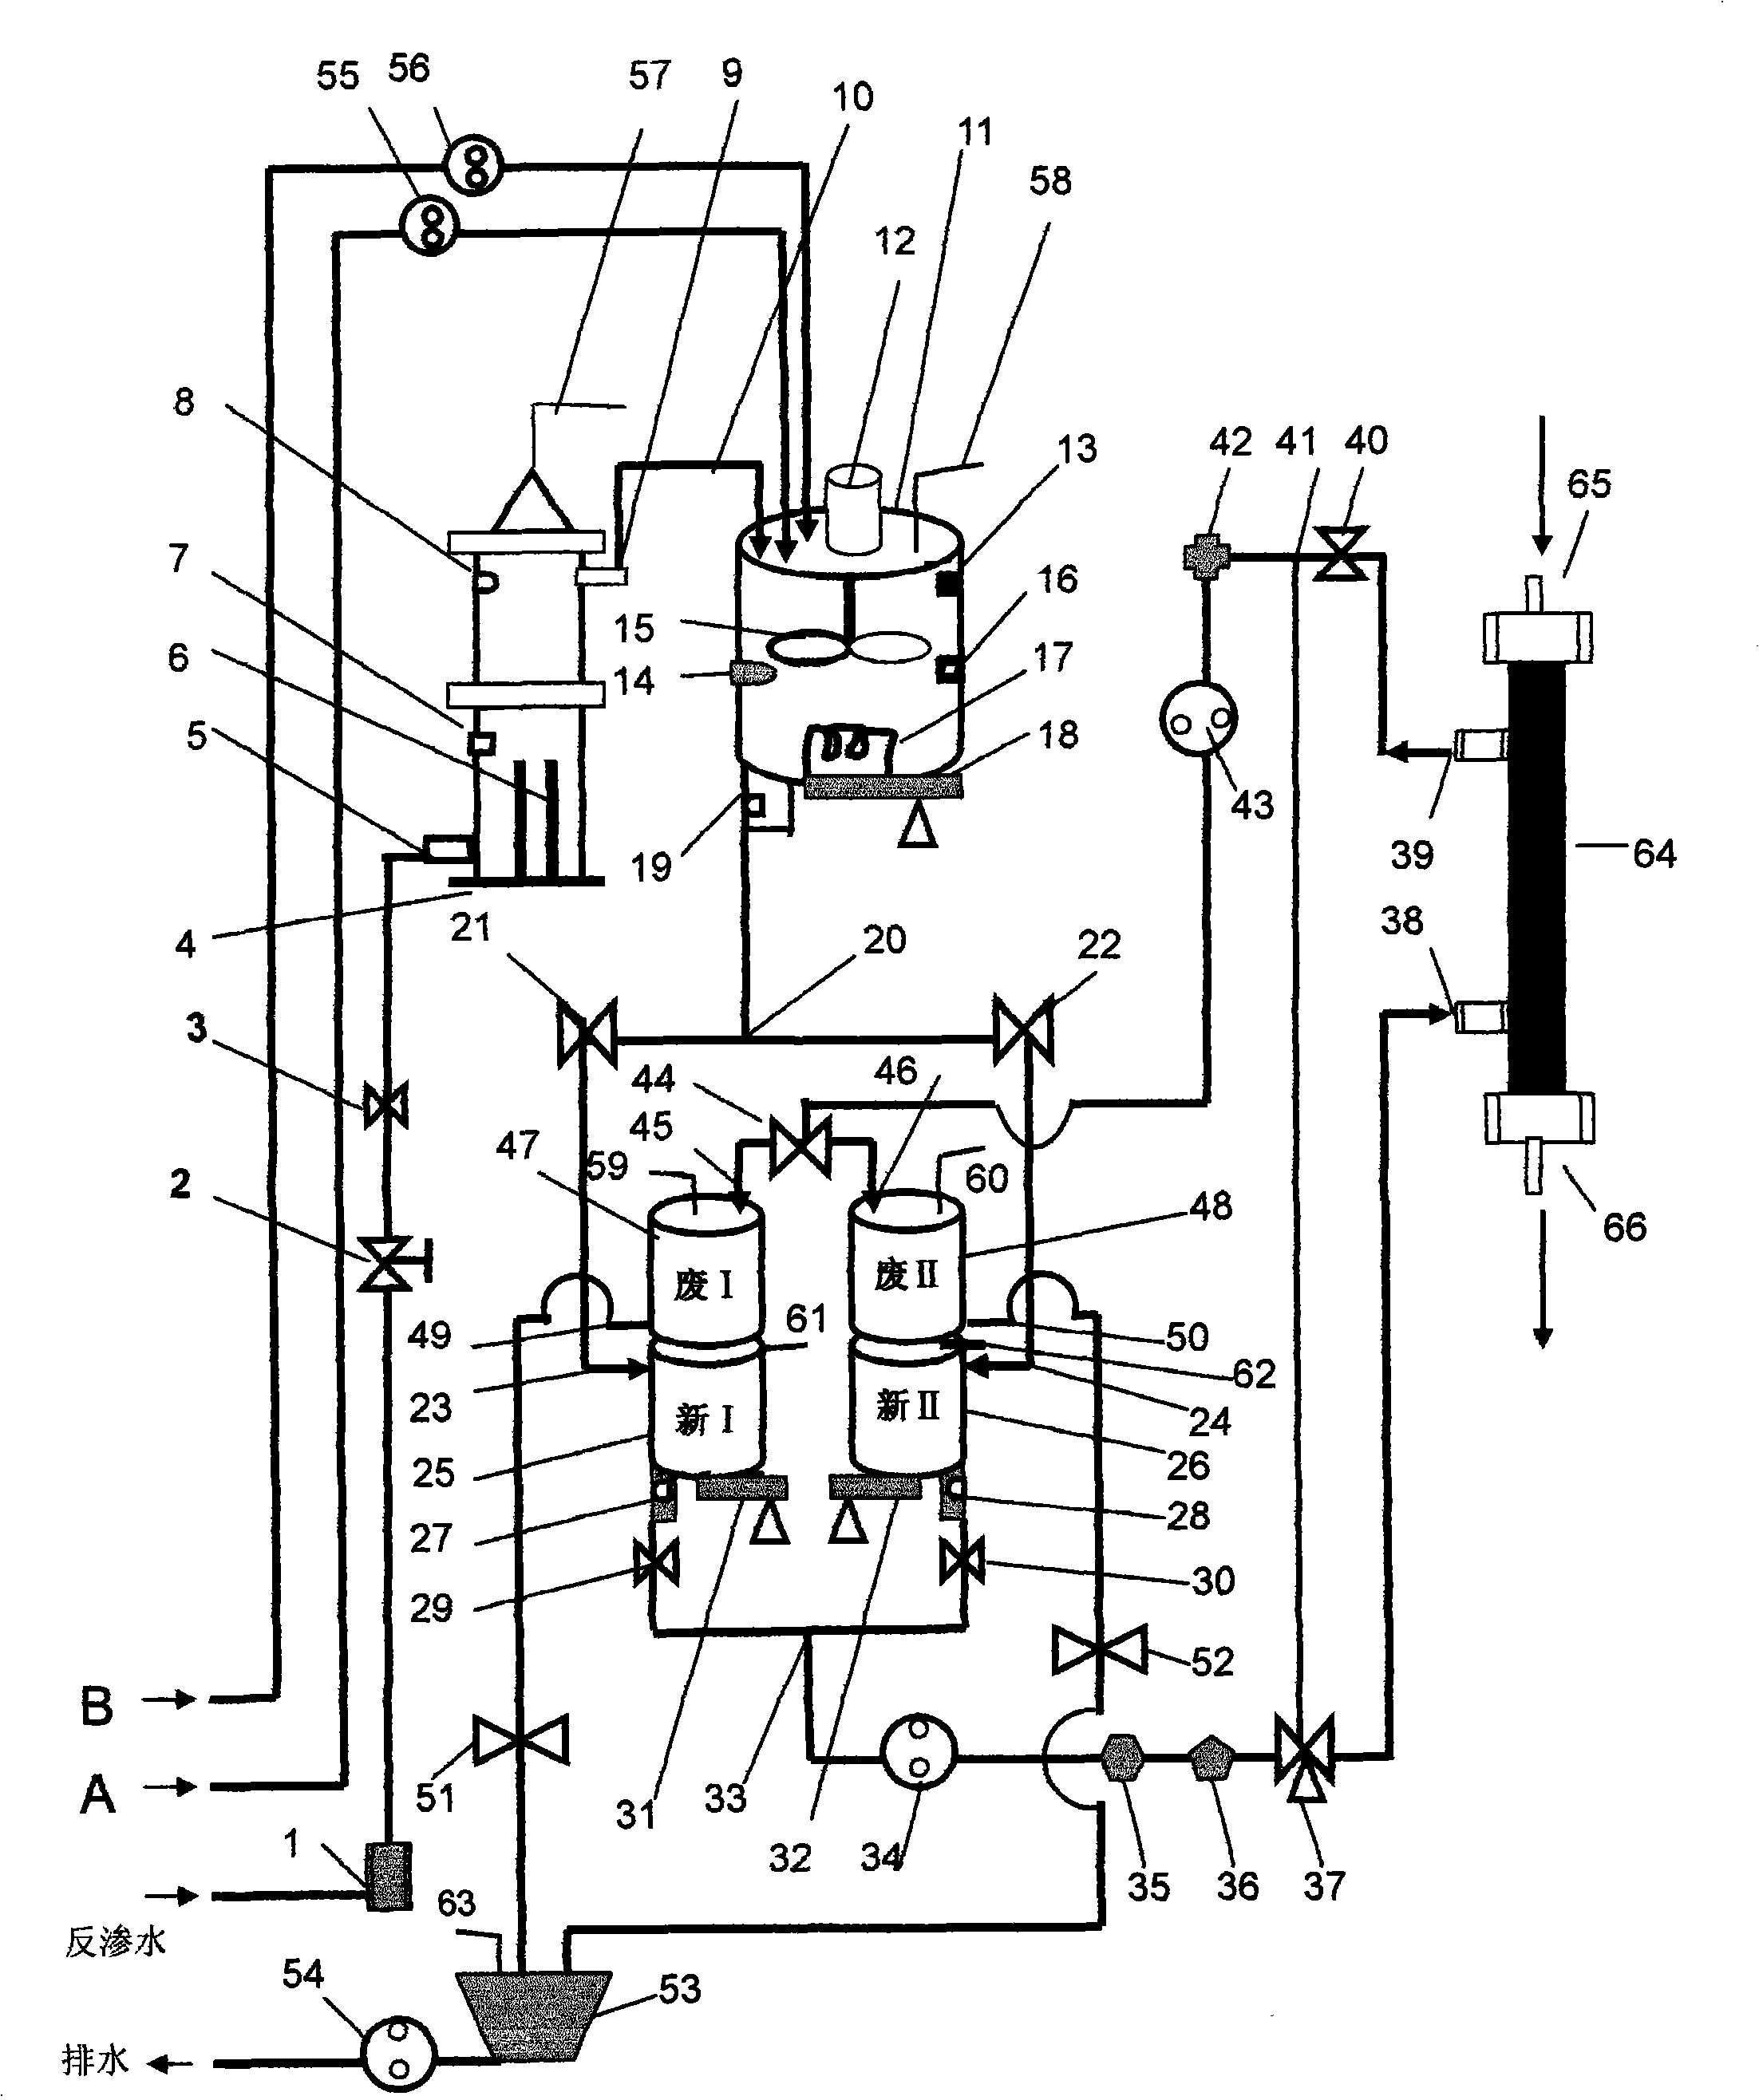 Hemodialysis system for controlling electric conduction and ultra-filtration by weighing